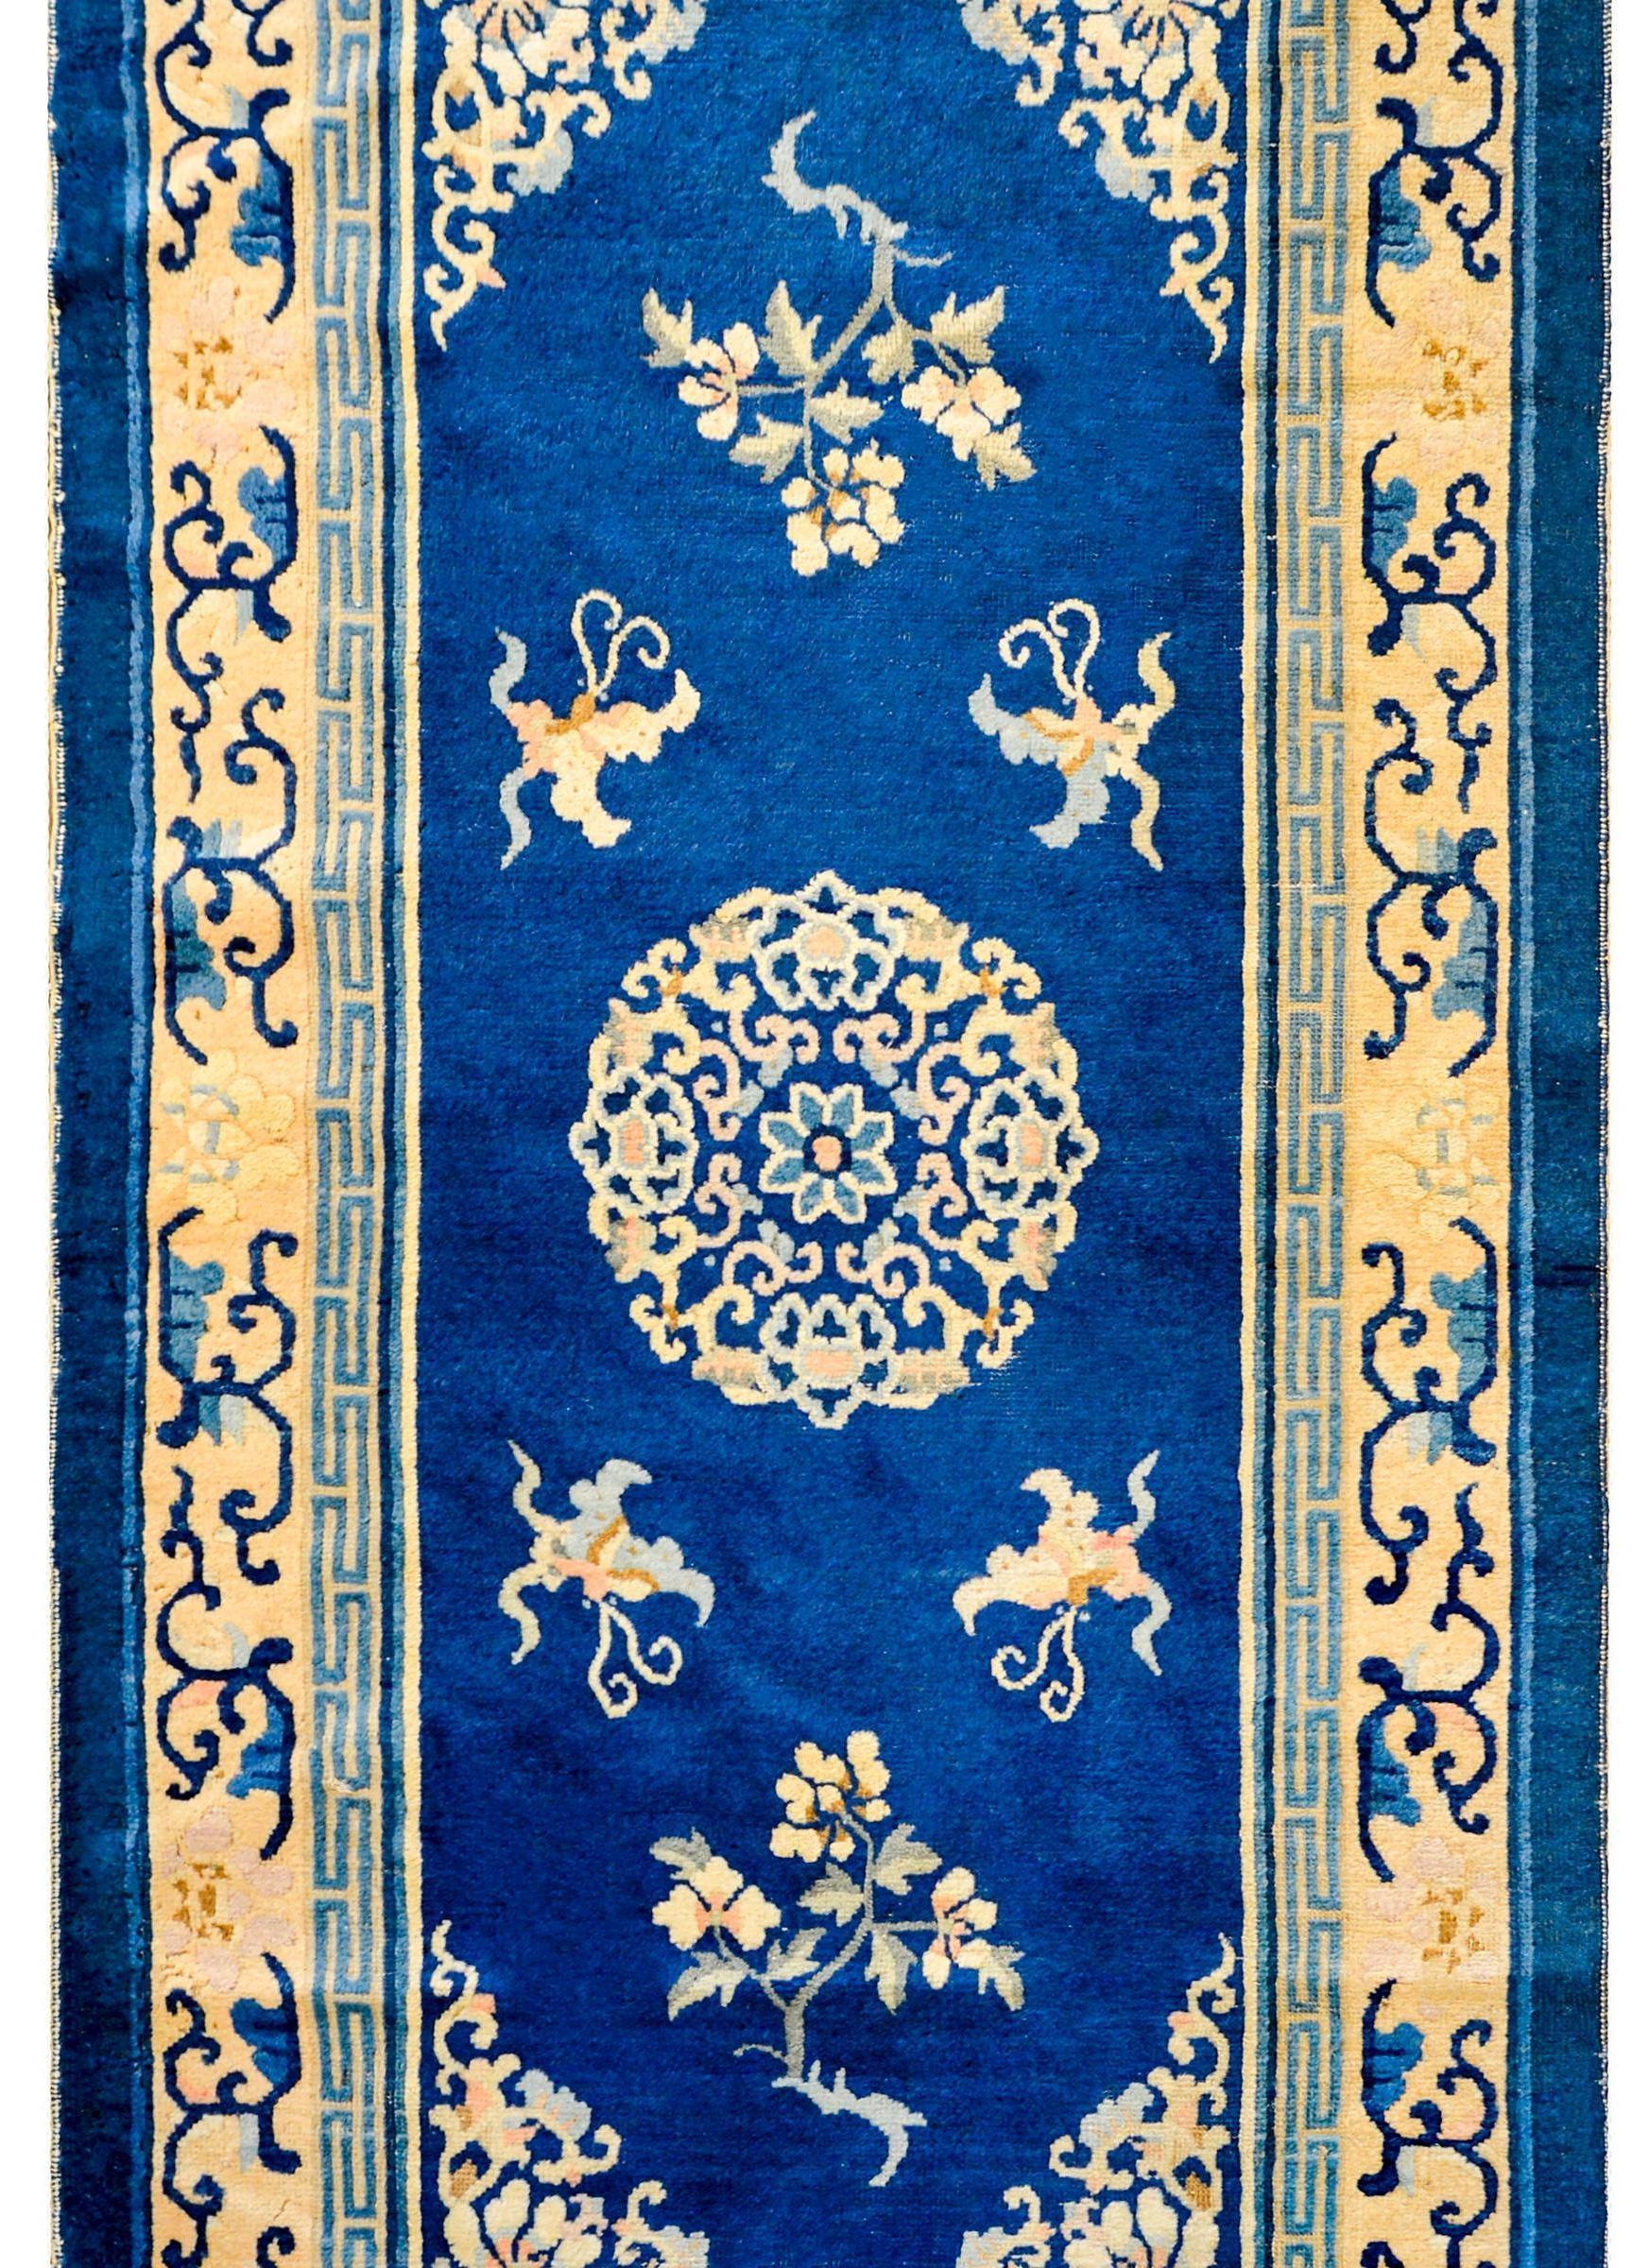 An early 20th century Chinese Peking rug woven in a fantastic indigo and cream color-way, with a large central peony and butterfly medallion amidst a field of chrysanthemums. The border is complex with two distinct peony and leafy vine patterned